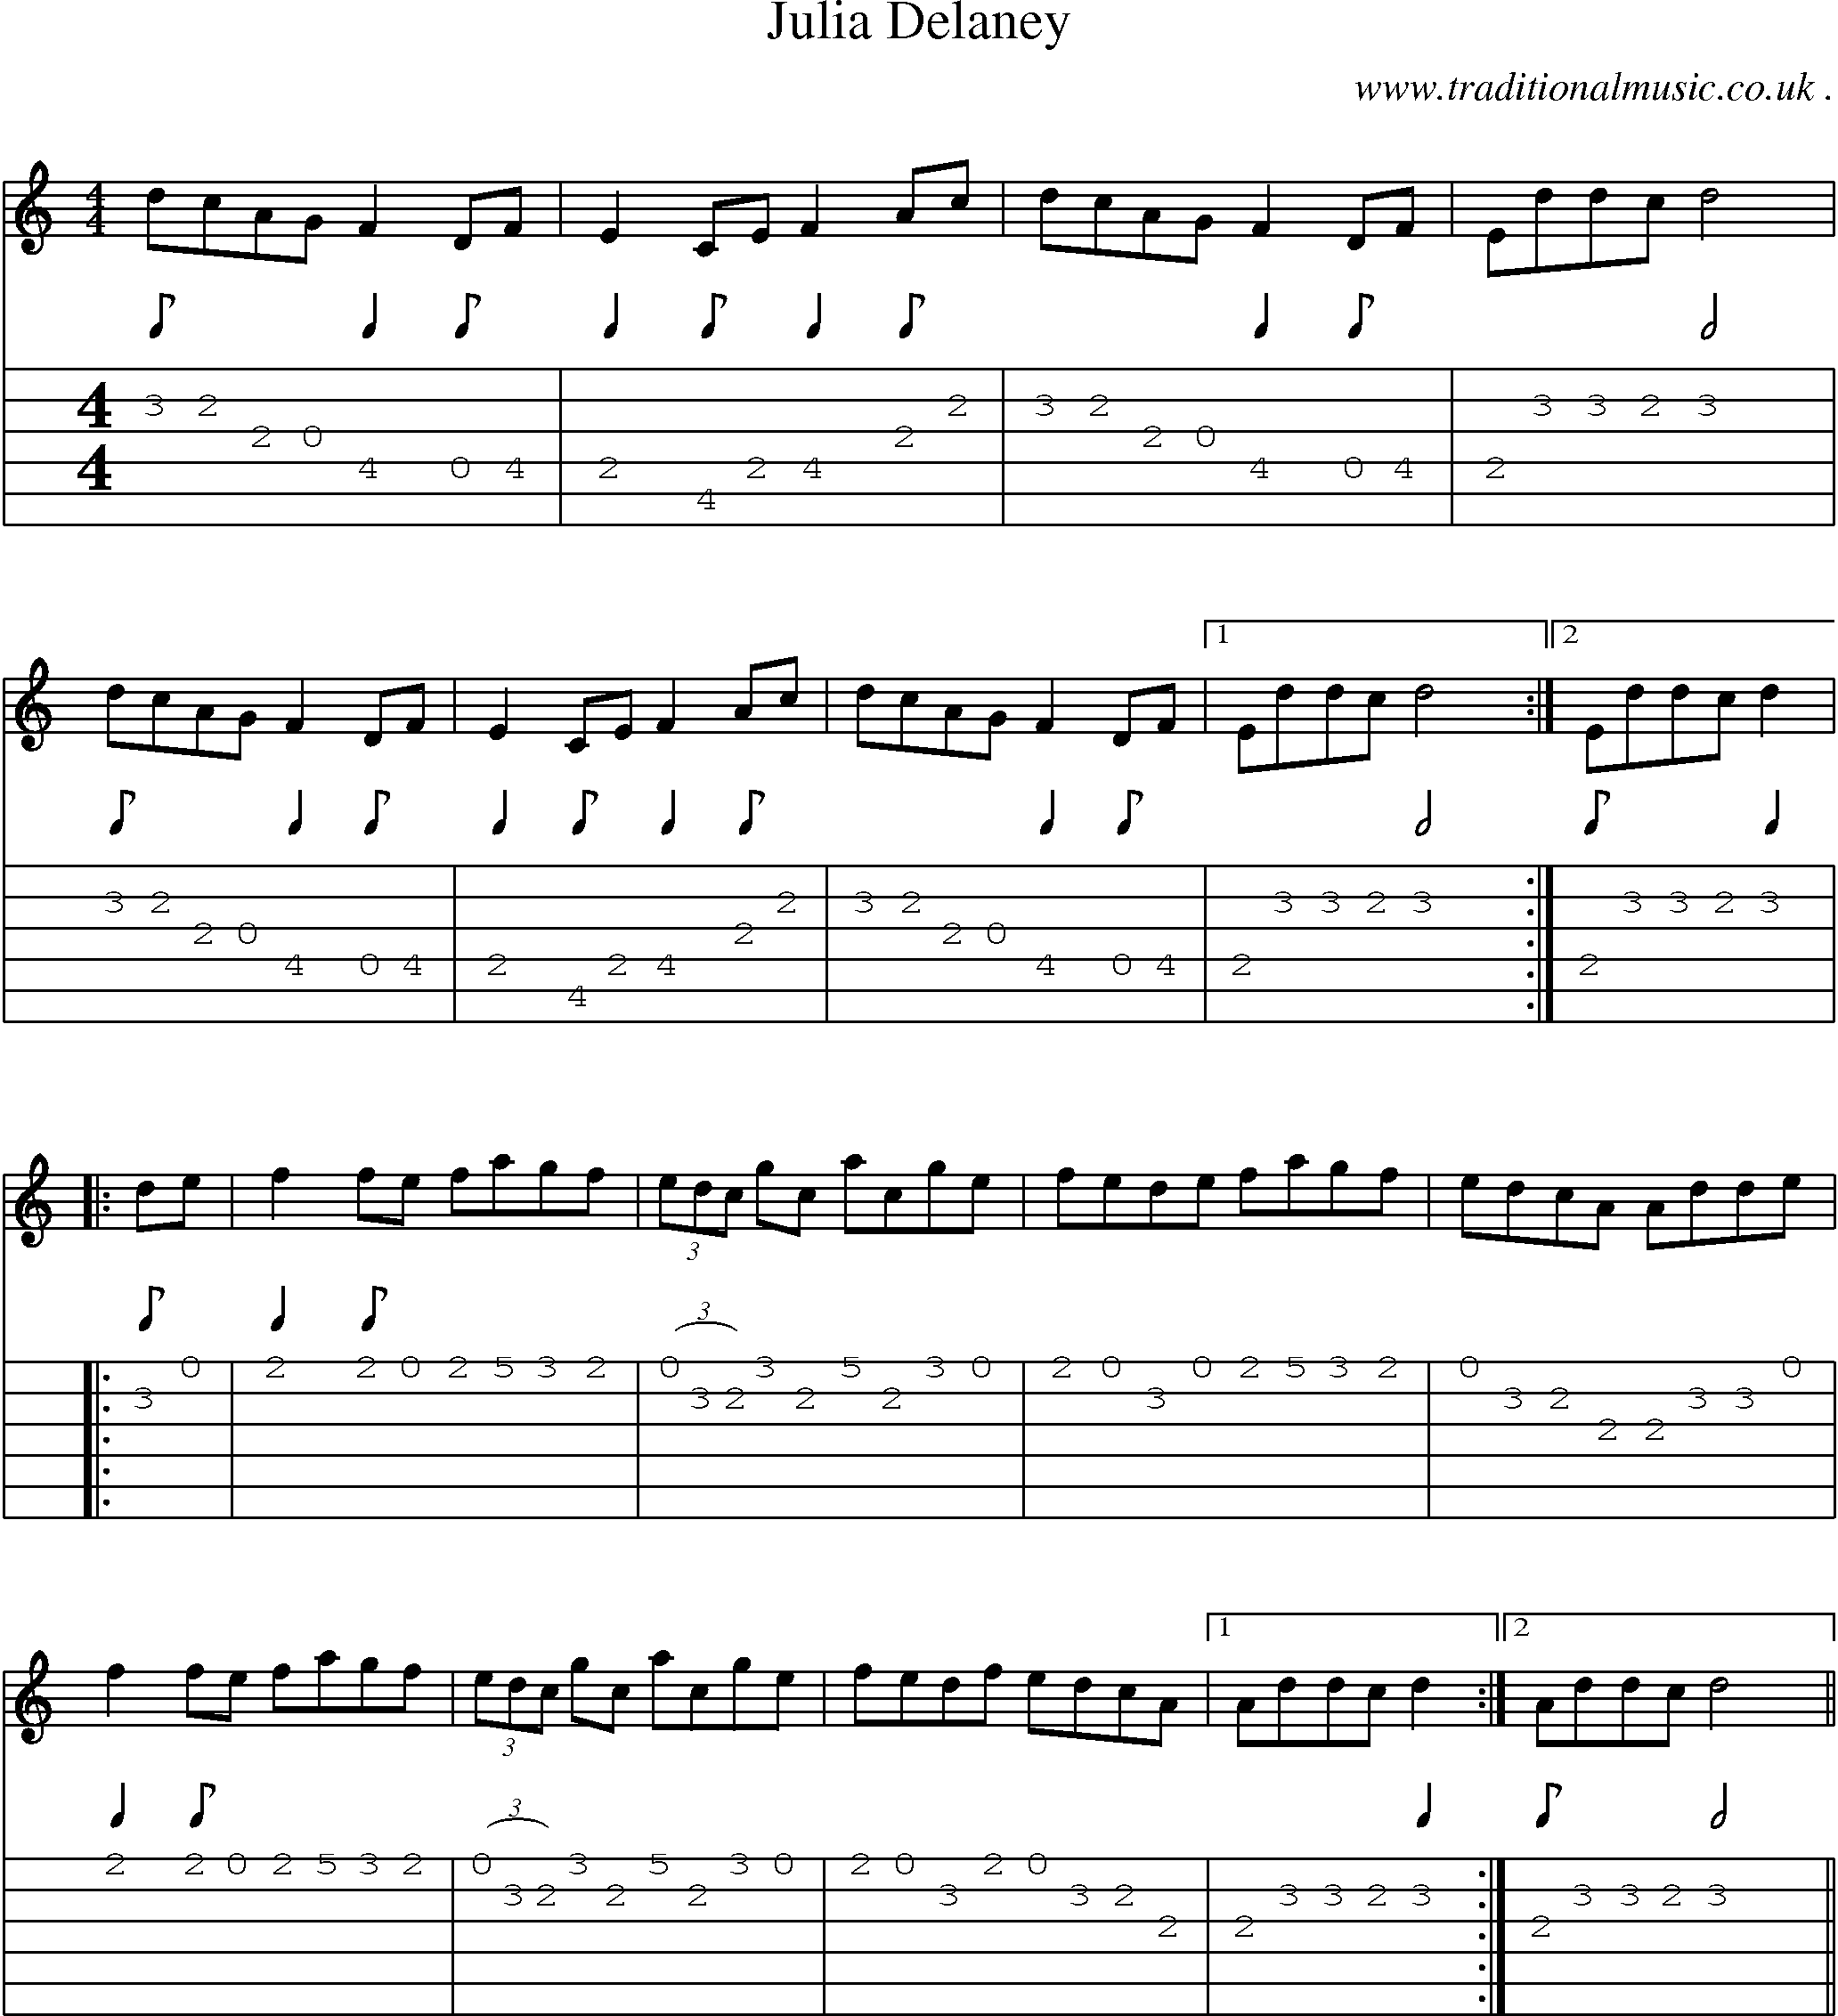 Sheet-Music and Guitar Tabs for Julia Delaney